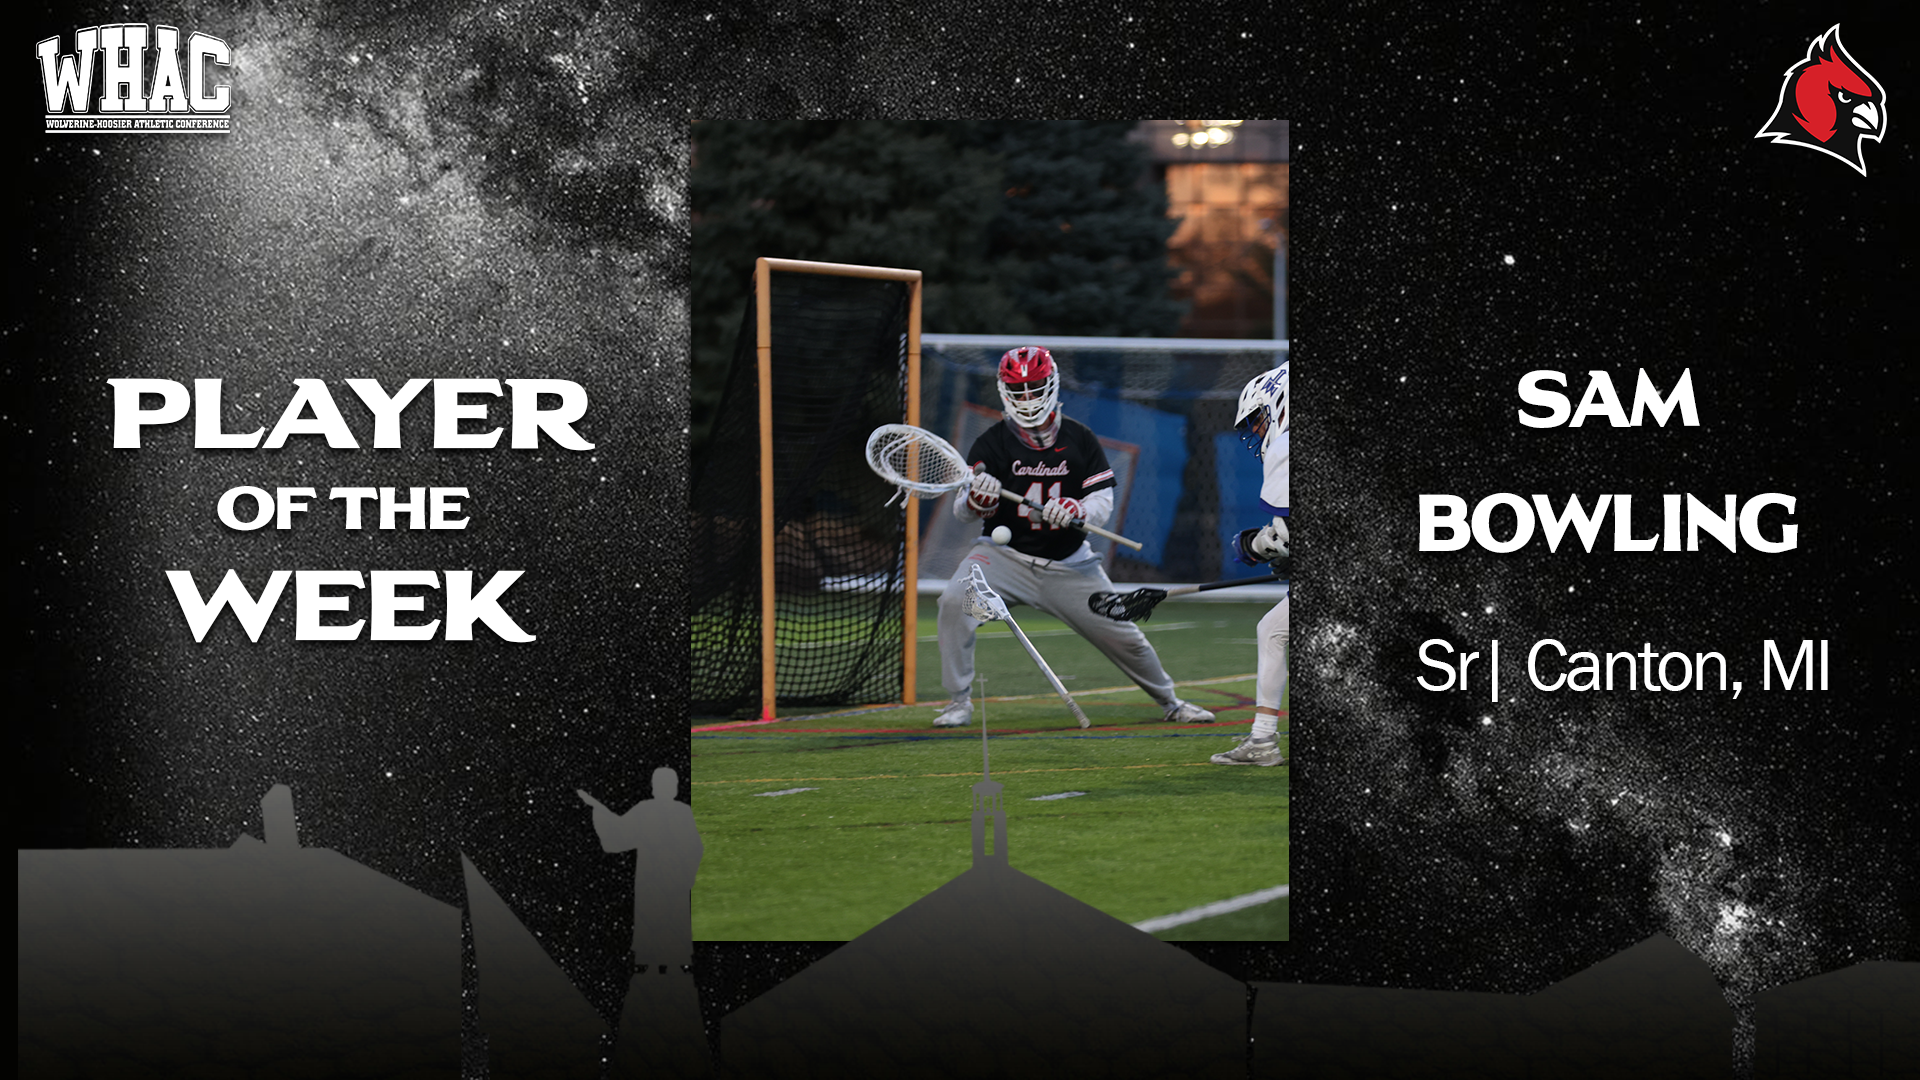 Sam Bowling earns WHAC Defensive Player of the Week